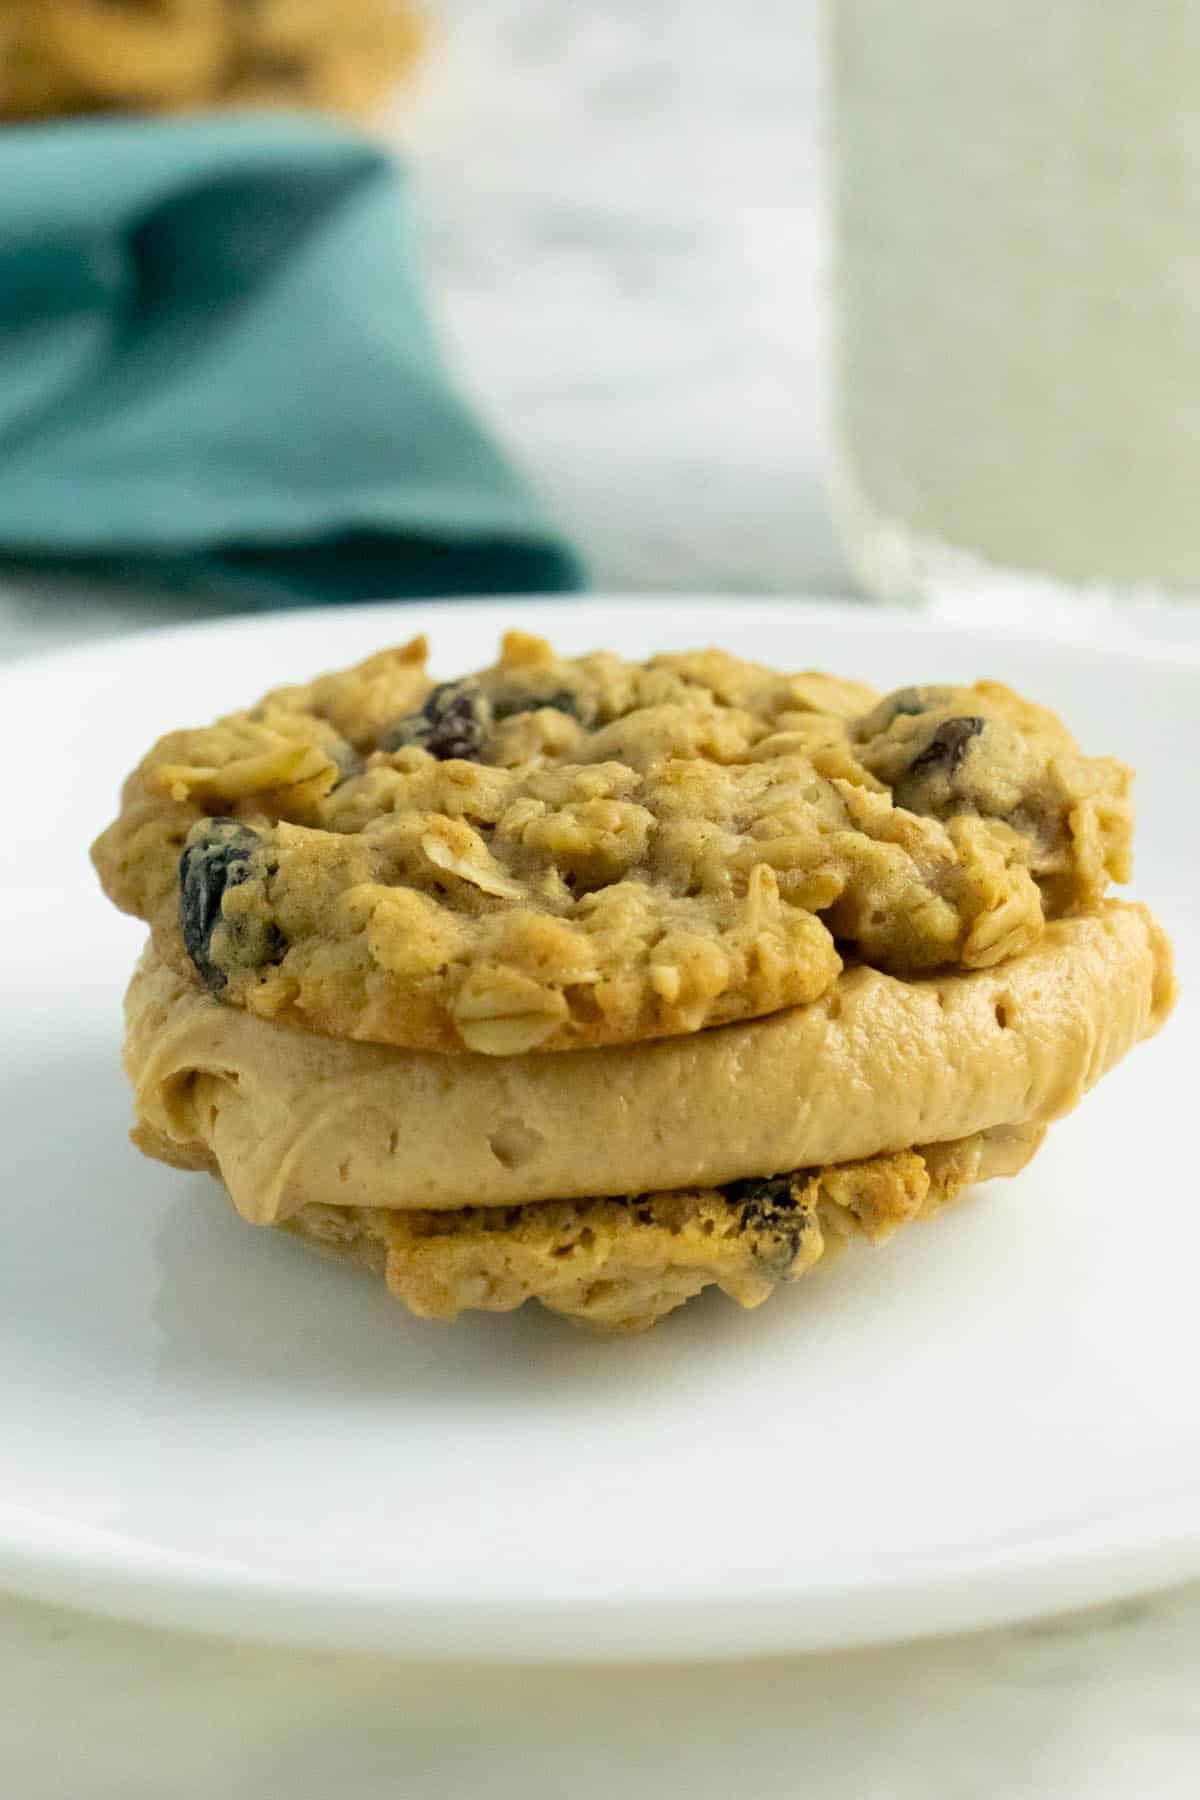 vegan cookie sandwich with oatmeal raisin cookies and peanut butter frosting